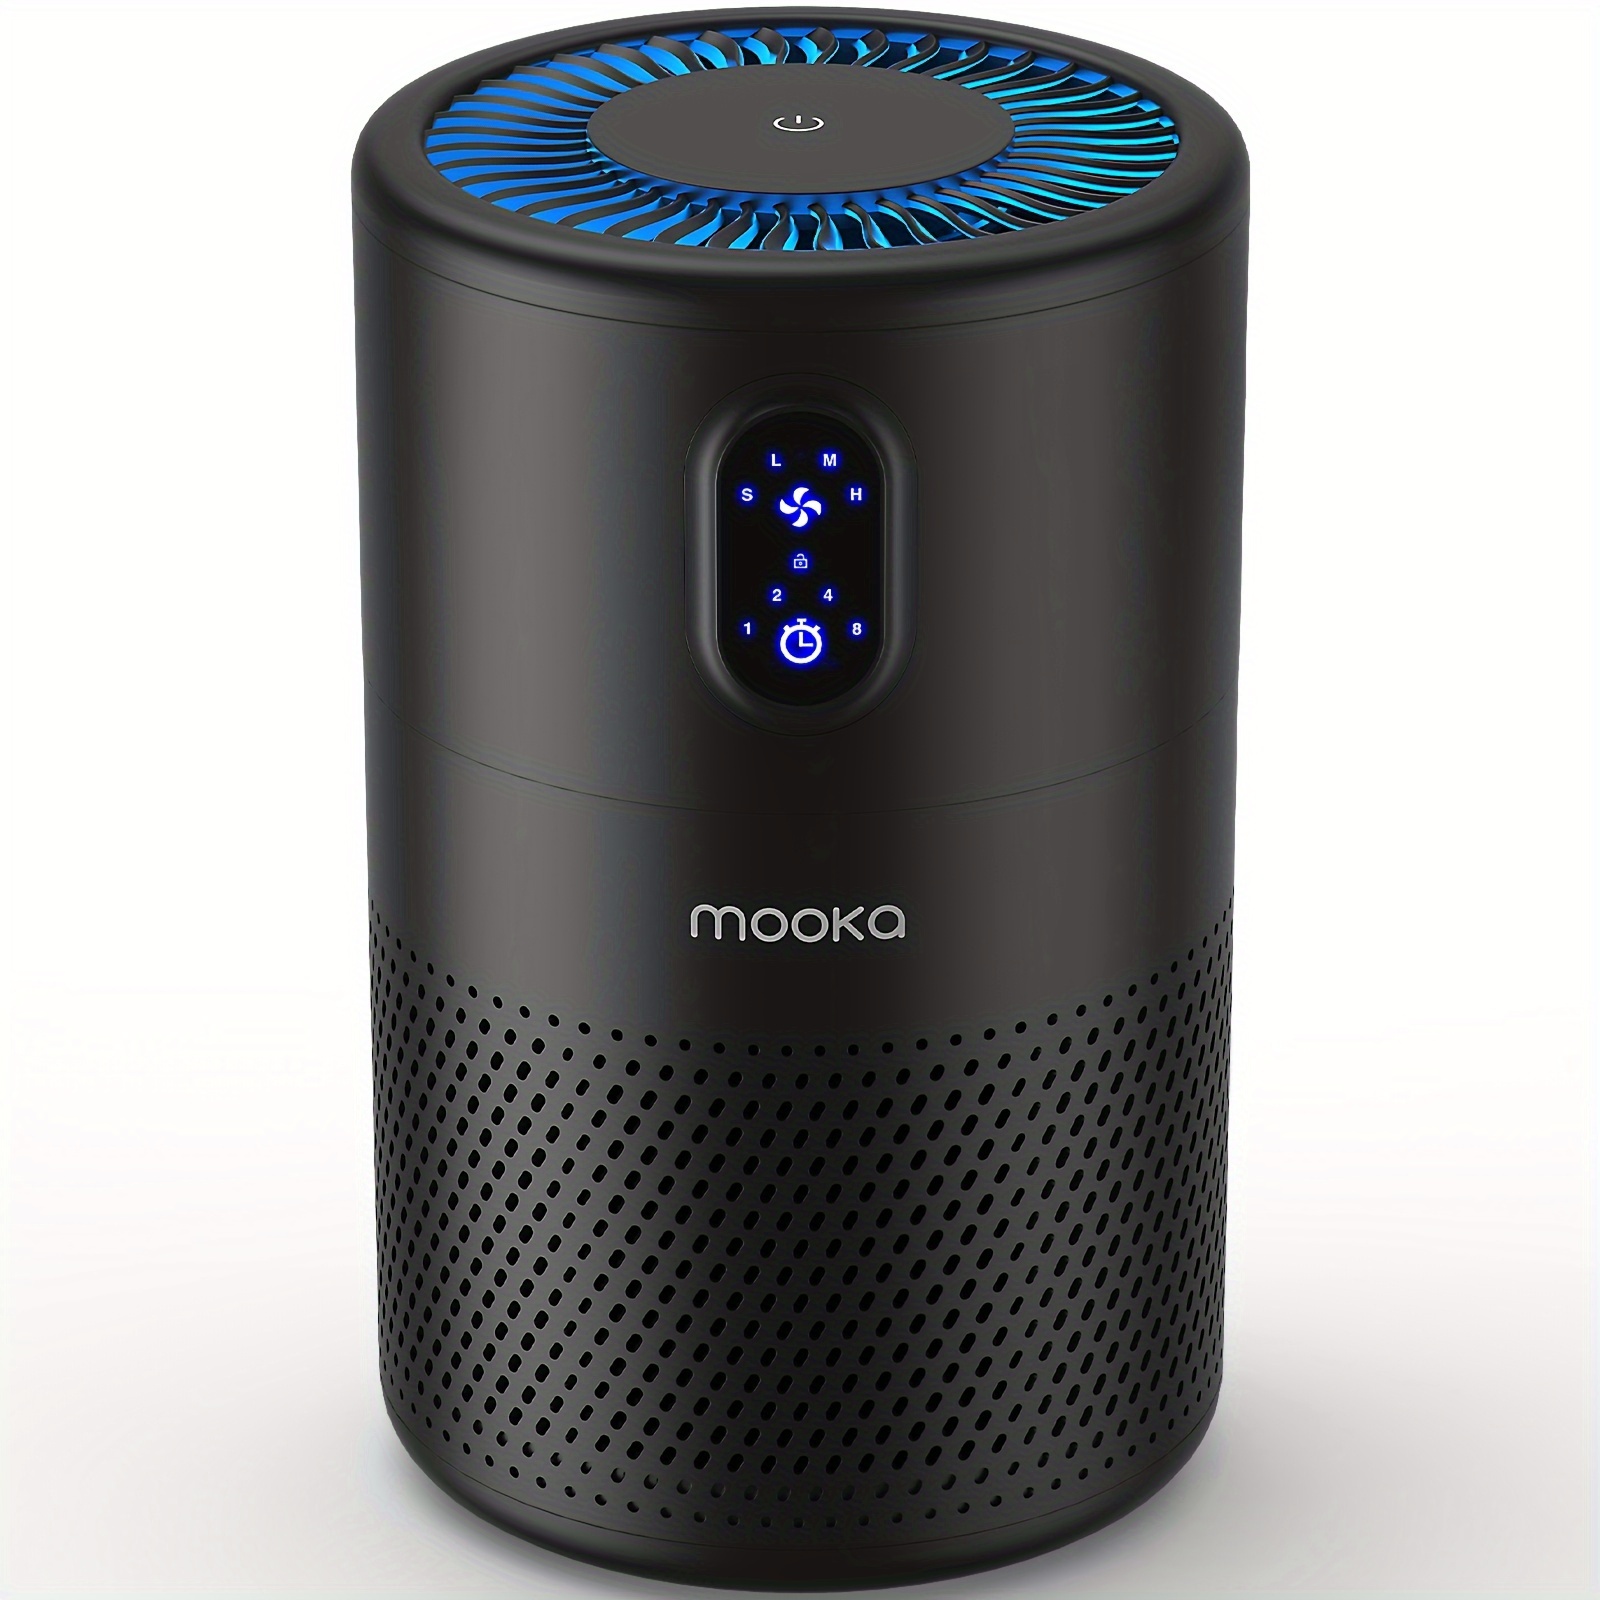 

Mooka Air Purifiers For Home Large Room Up To 1076ft, H13 True Hepa Air Filter Cleaner, Odor Eliminator, Remove Smell Dust Pollen Pet Dander, Led Light (available For California)-black